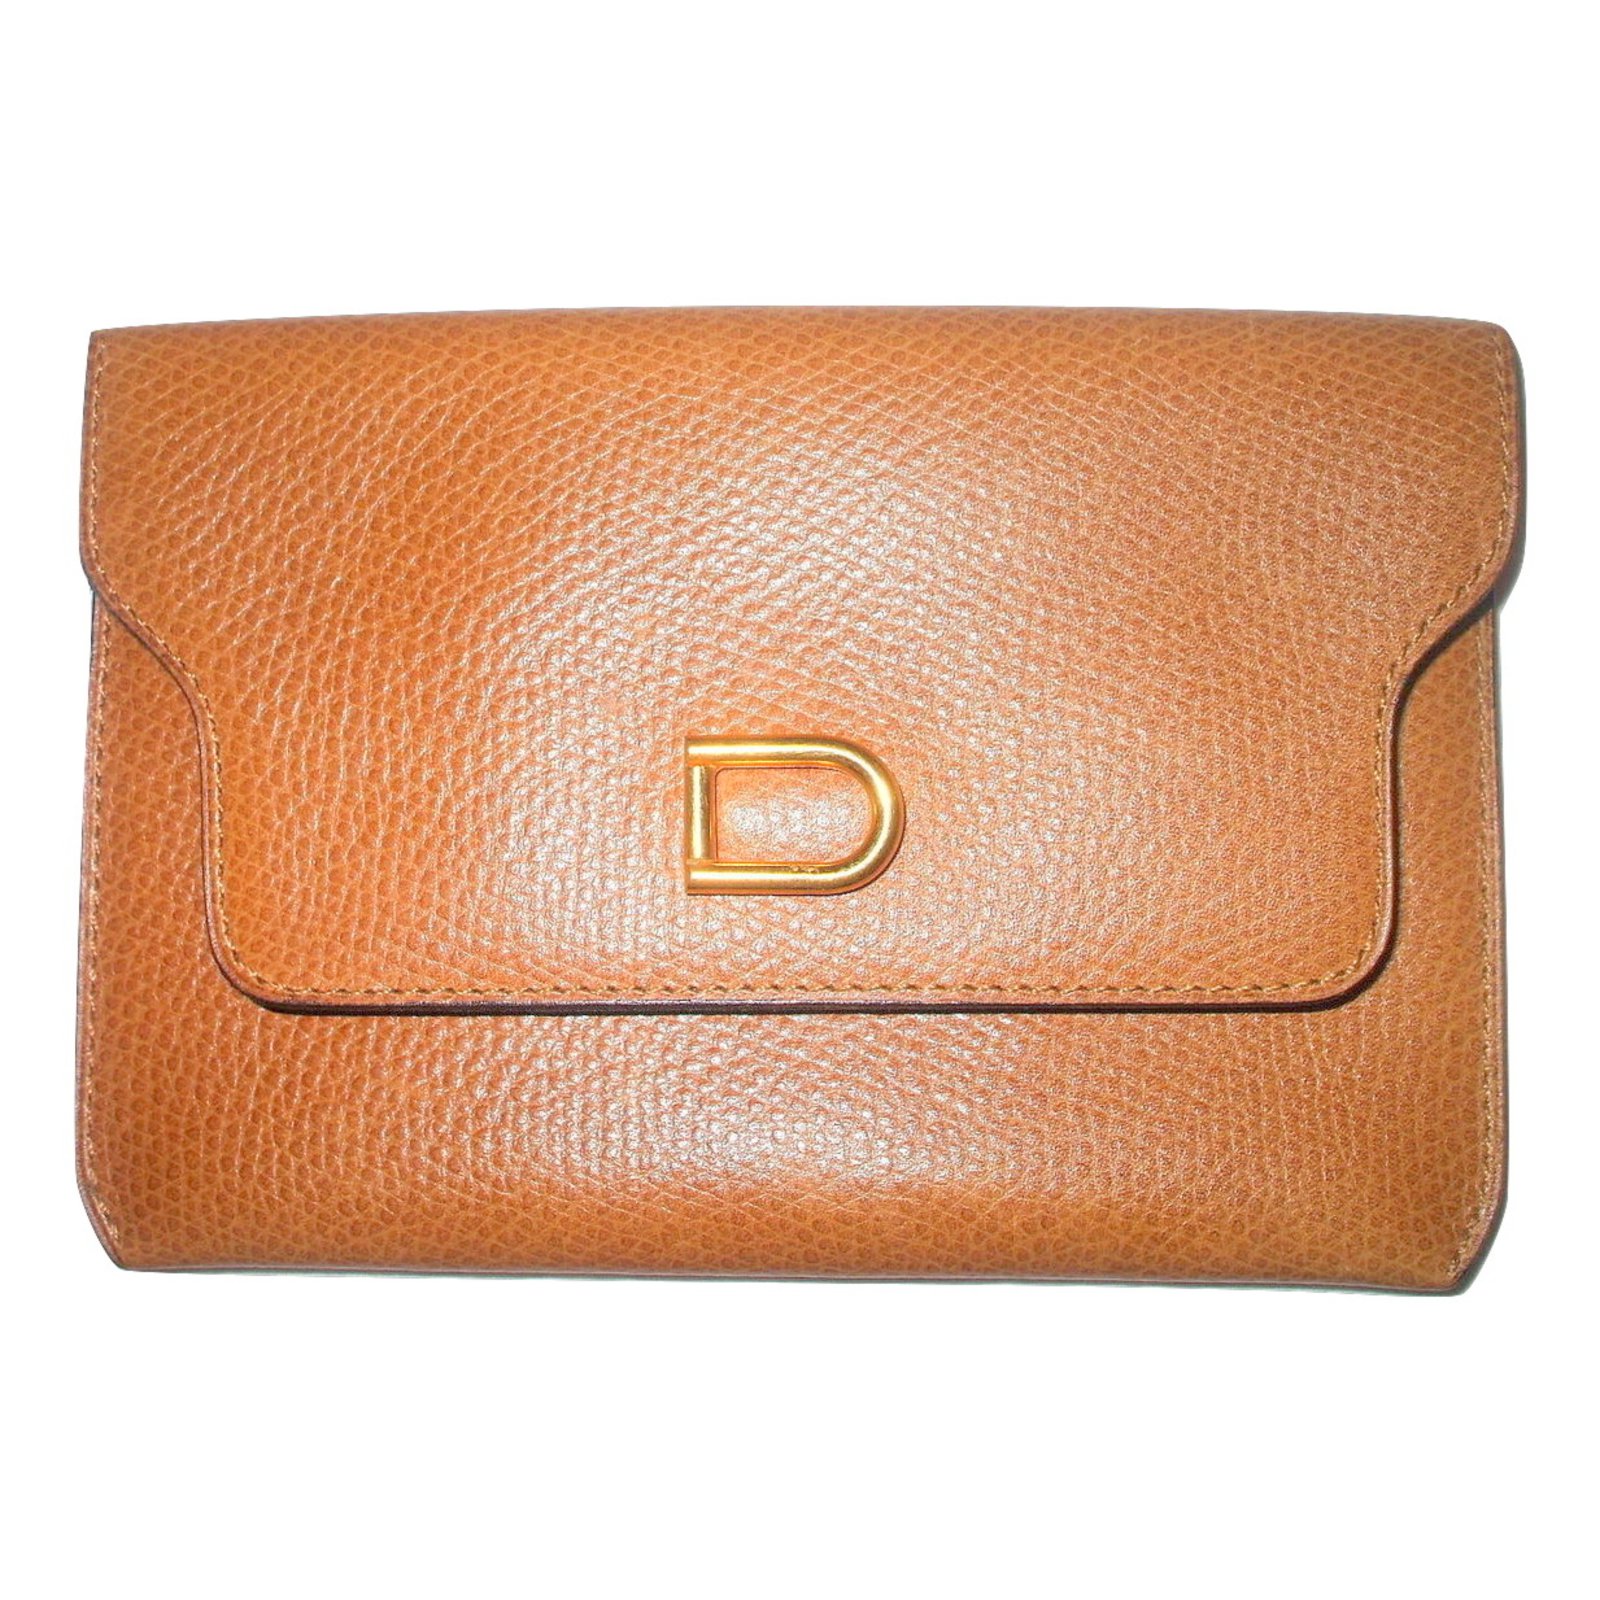 Delvaux Brown Leather Card Holder Wallet Delvaux